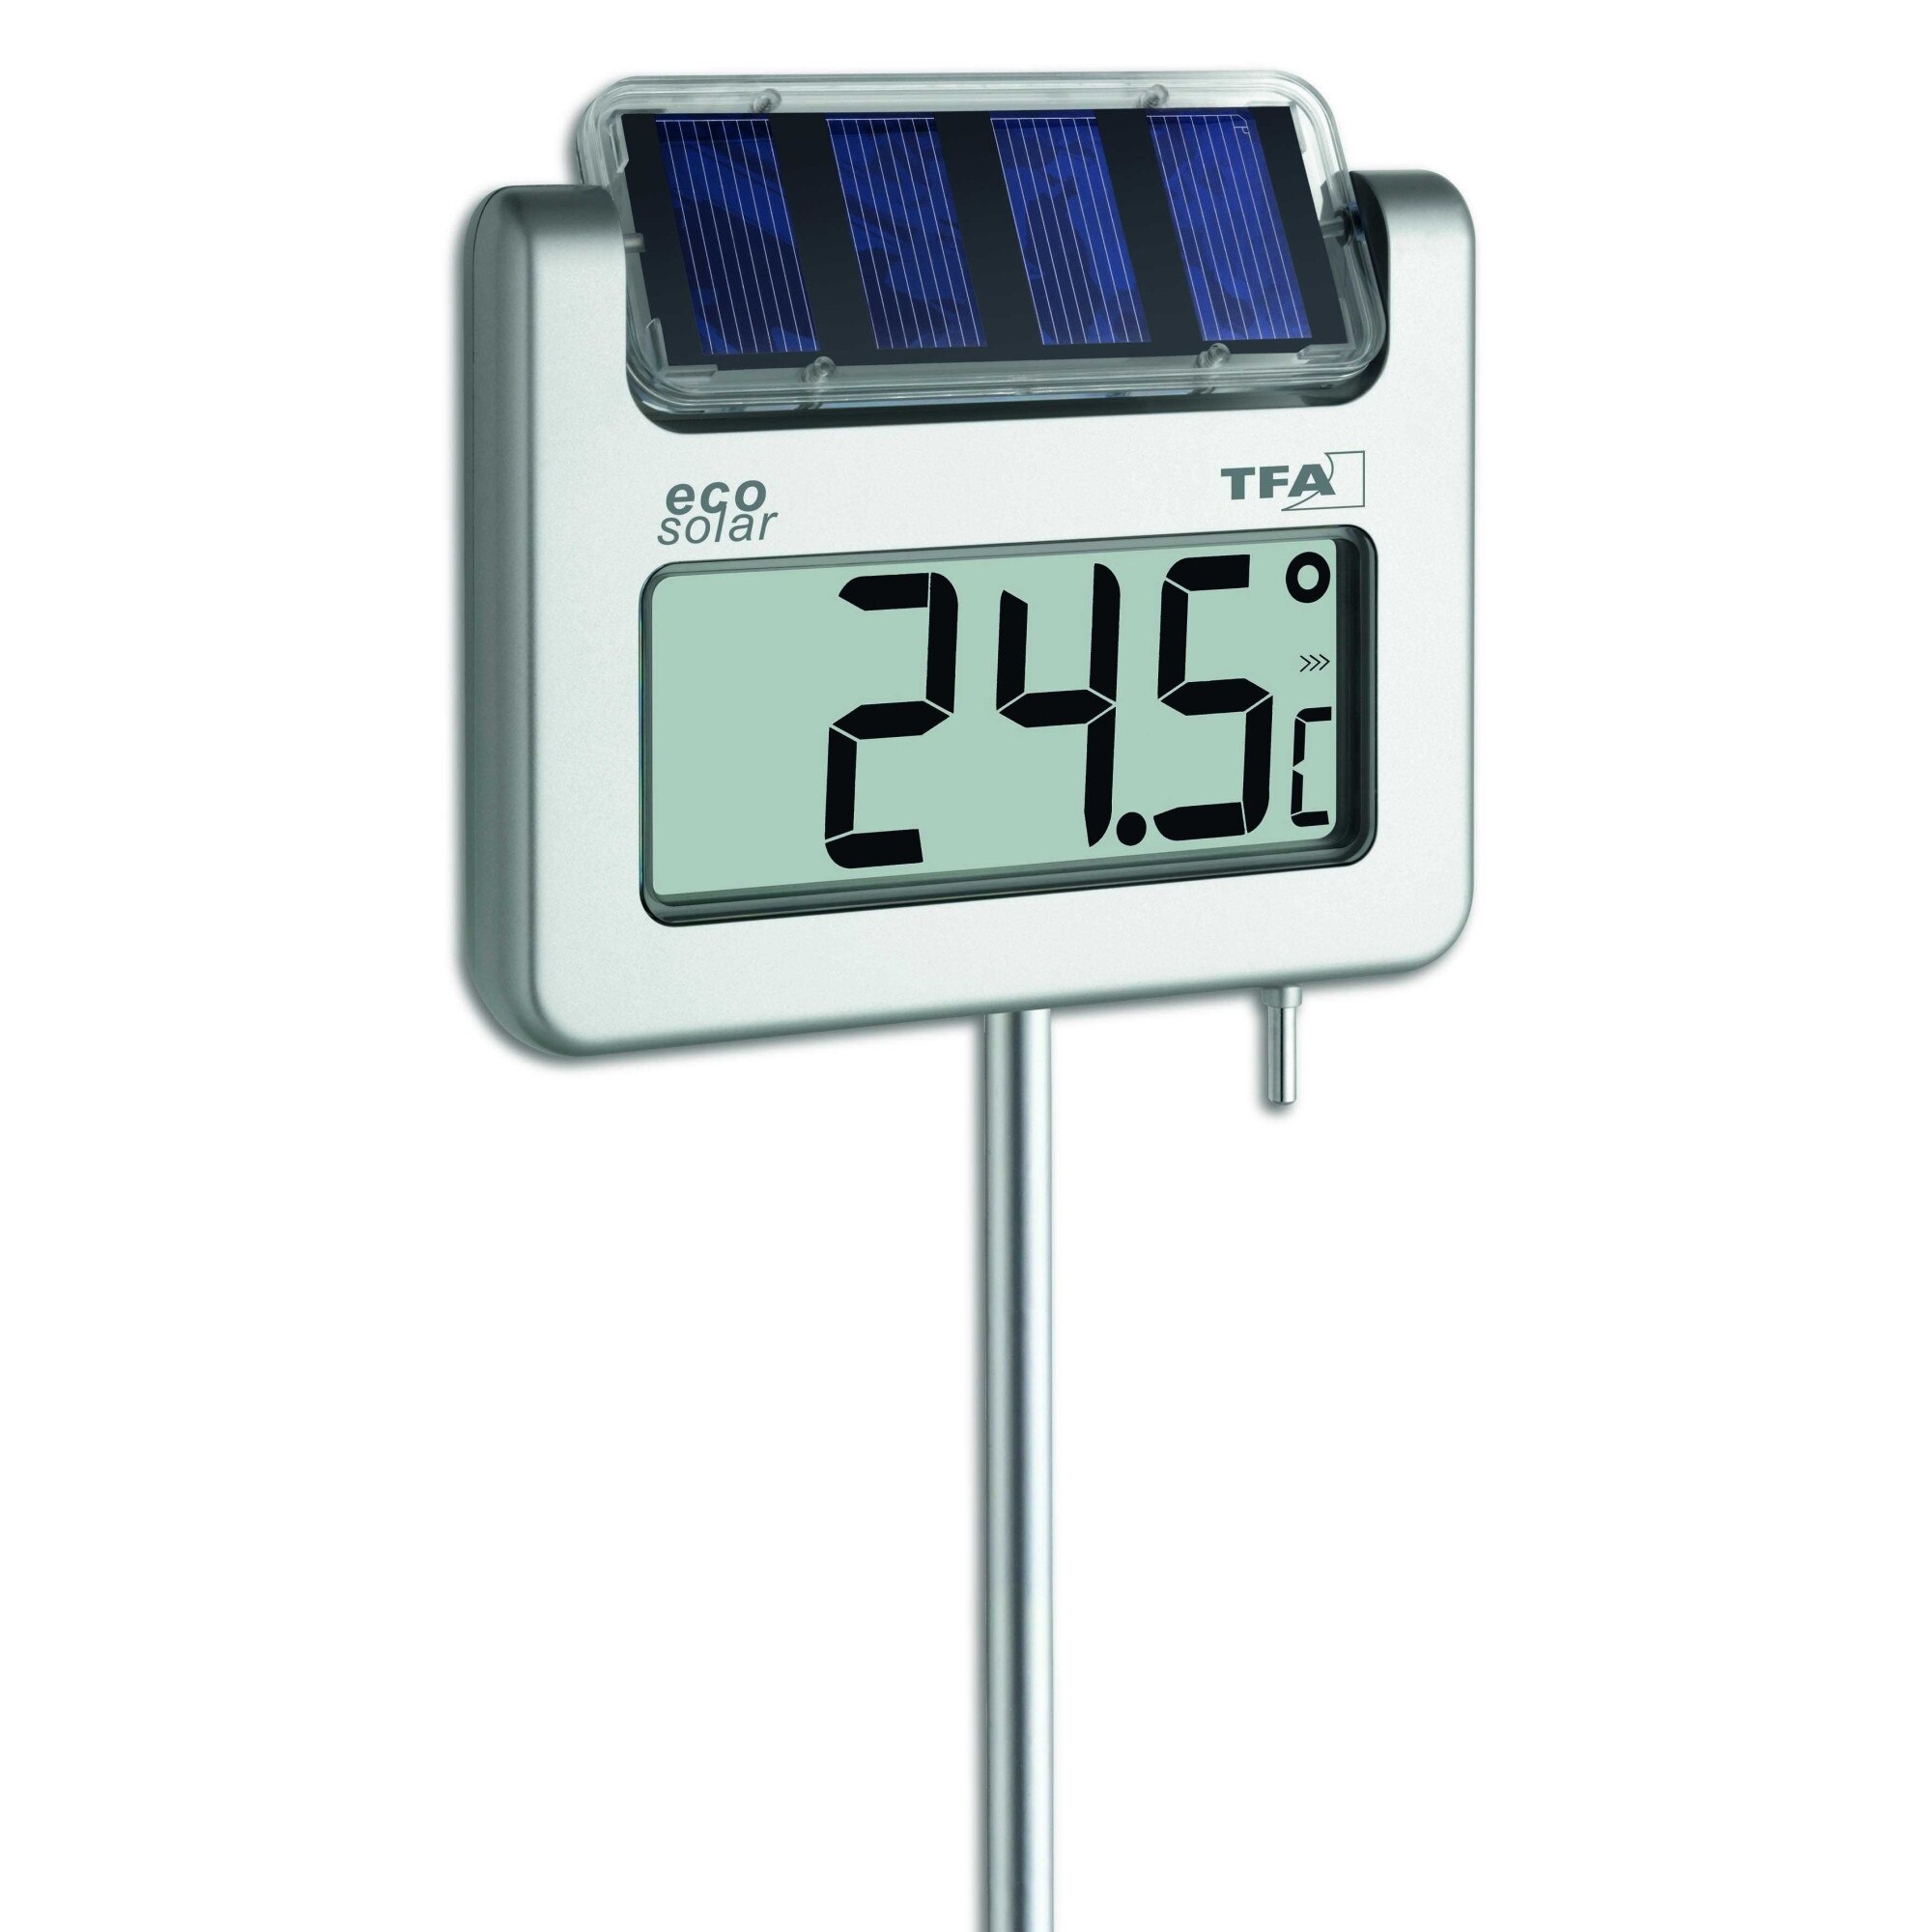 Large digital outdoor thermometer